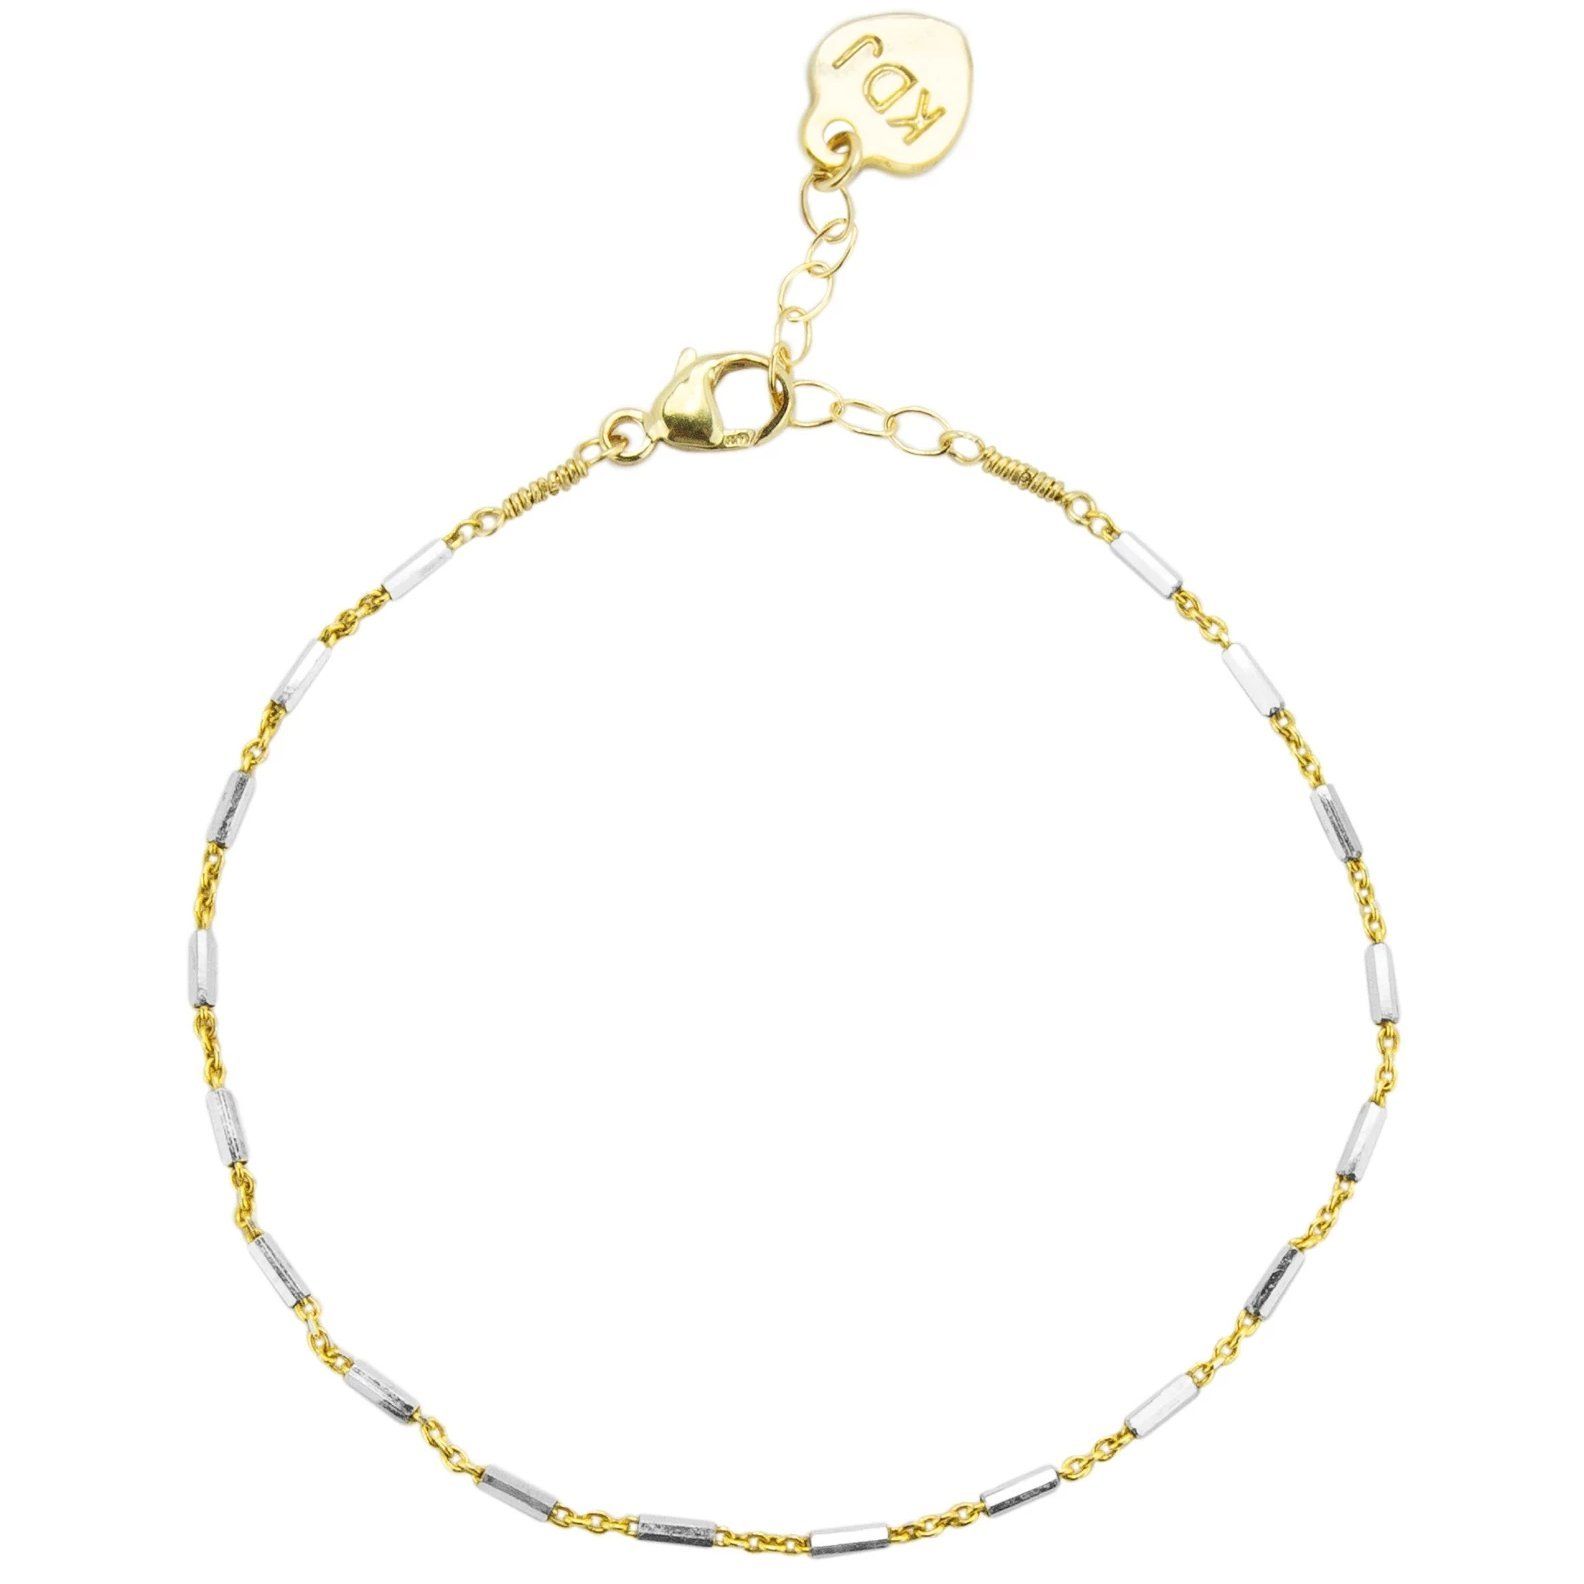 Silver and gold came together to form the perfect friendship in the form of this dainty bracelet. Silver and gold lovers alike agree on this one!  Handmade in California by Katie Dean Jewelry.